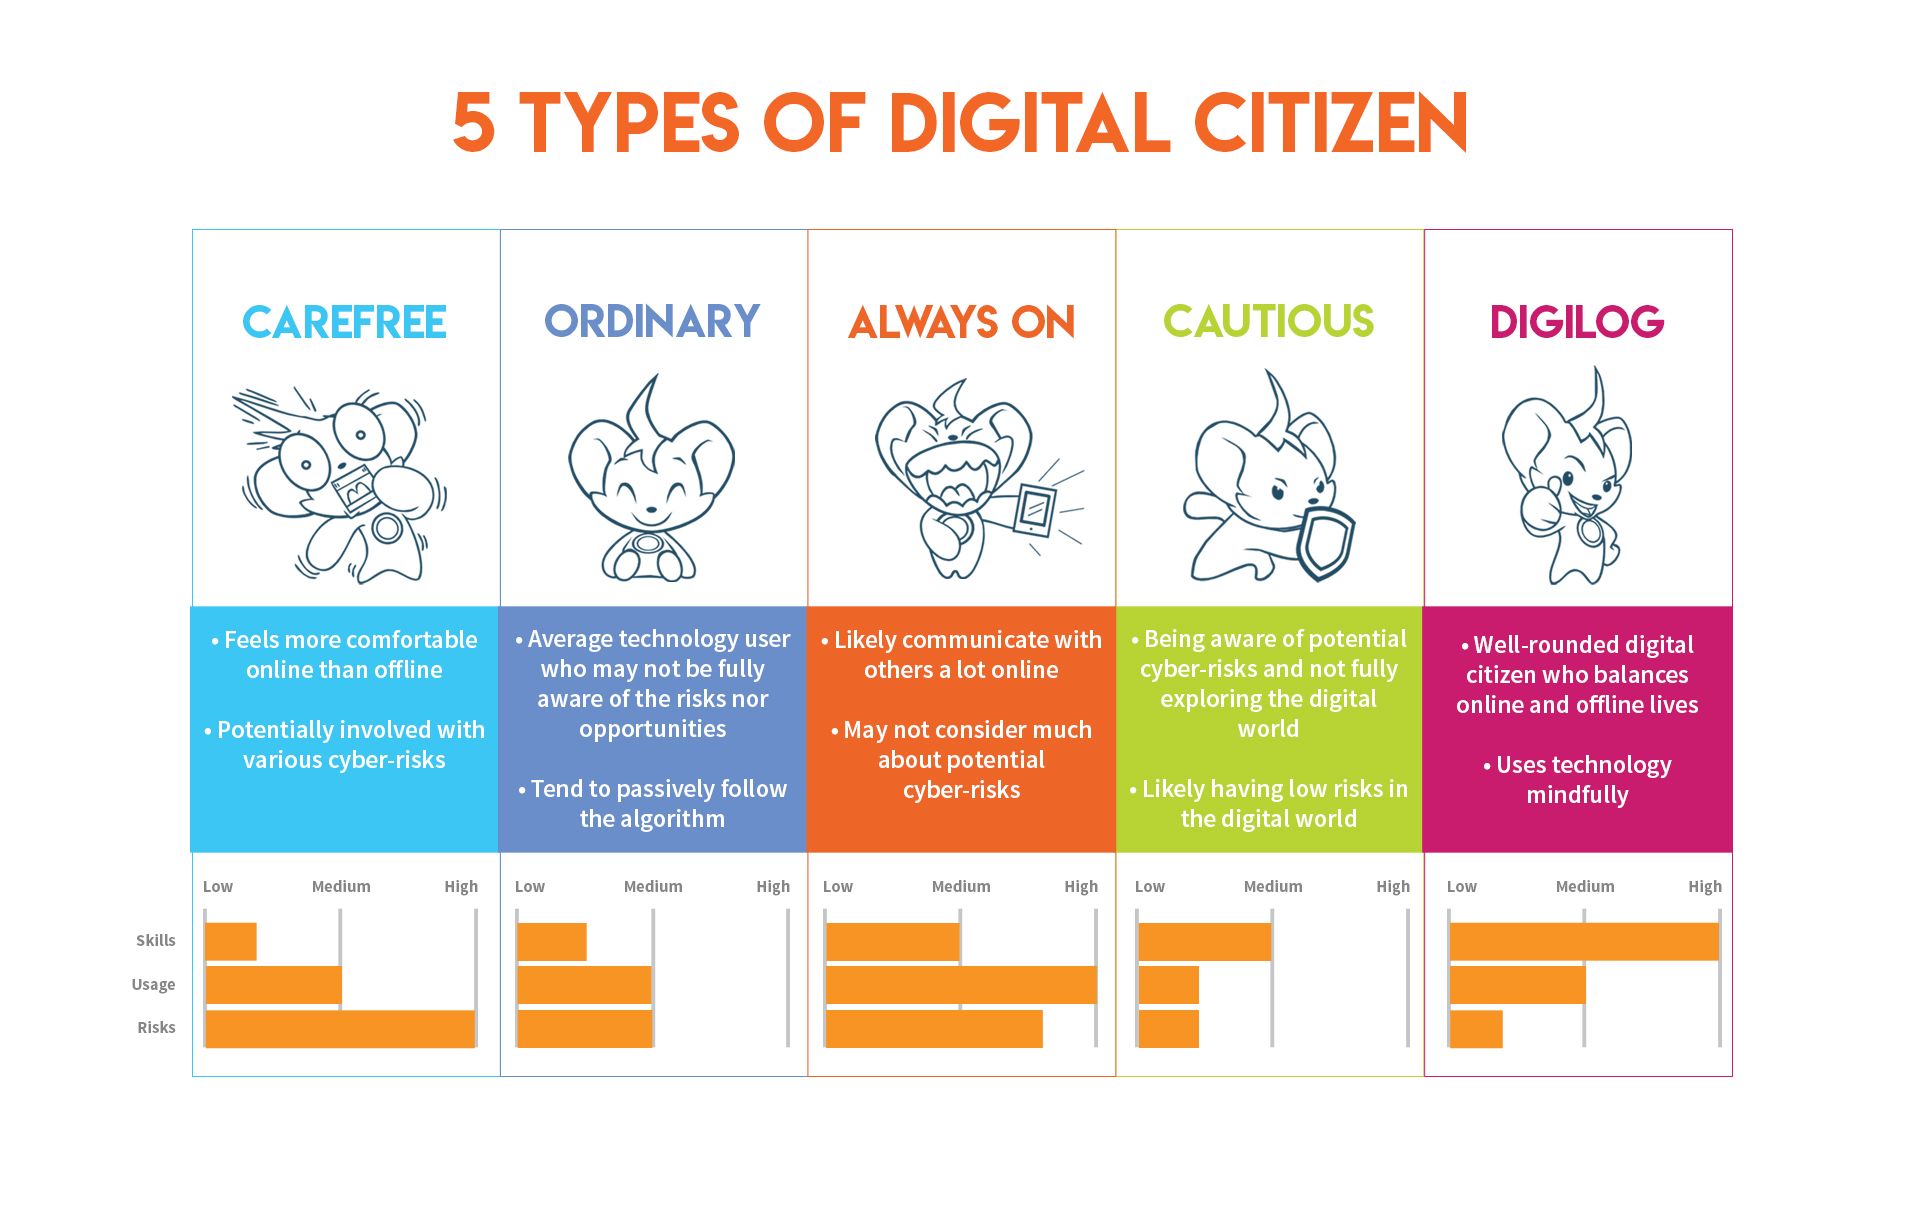 Global Launch of the Digital Citizenship Test on the Safer Internet Day